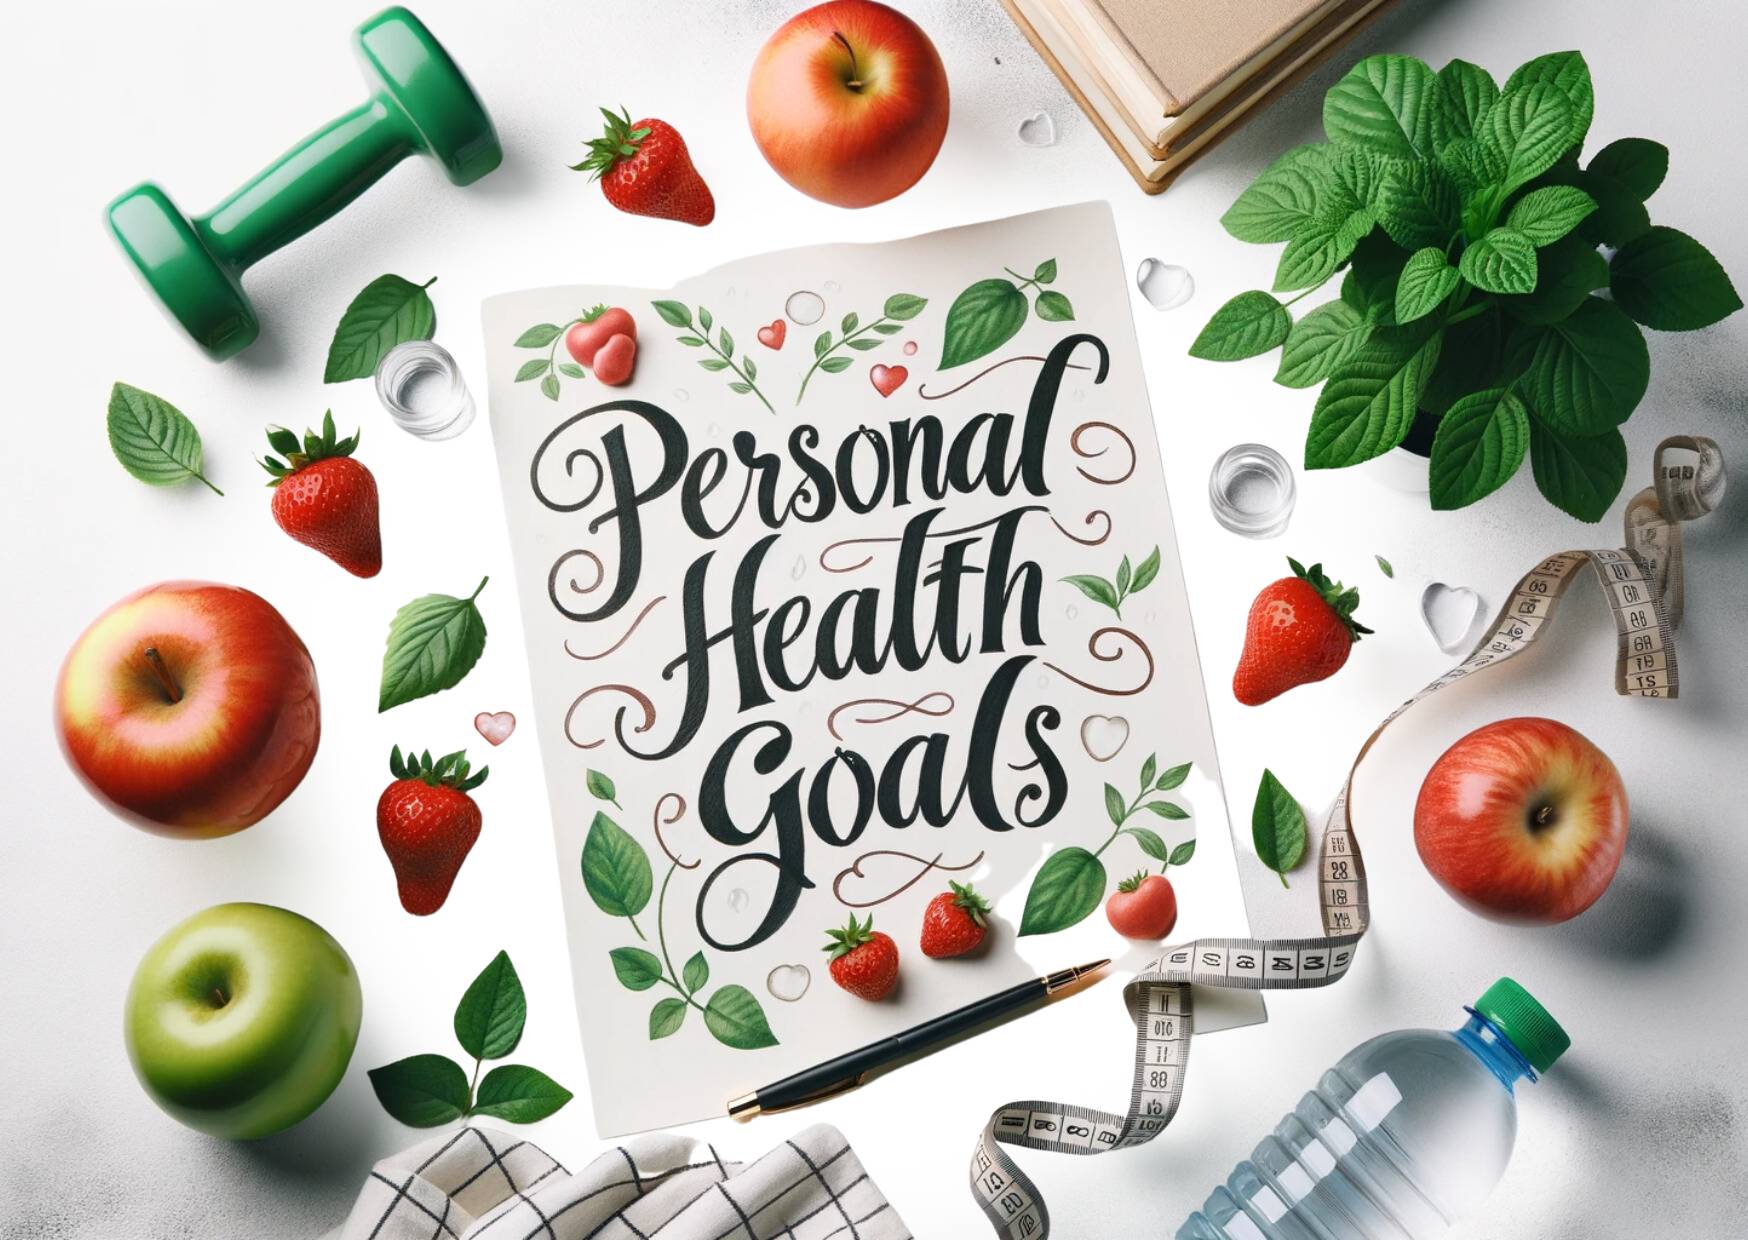 Photo of the words 'Personal Health Goals' written in elegant calligraphy on a pristine white paper. Surrounding the words are various symbols of health